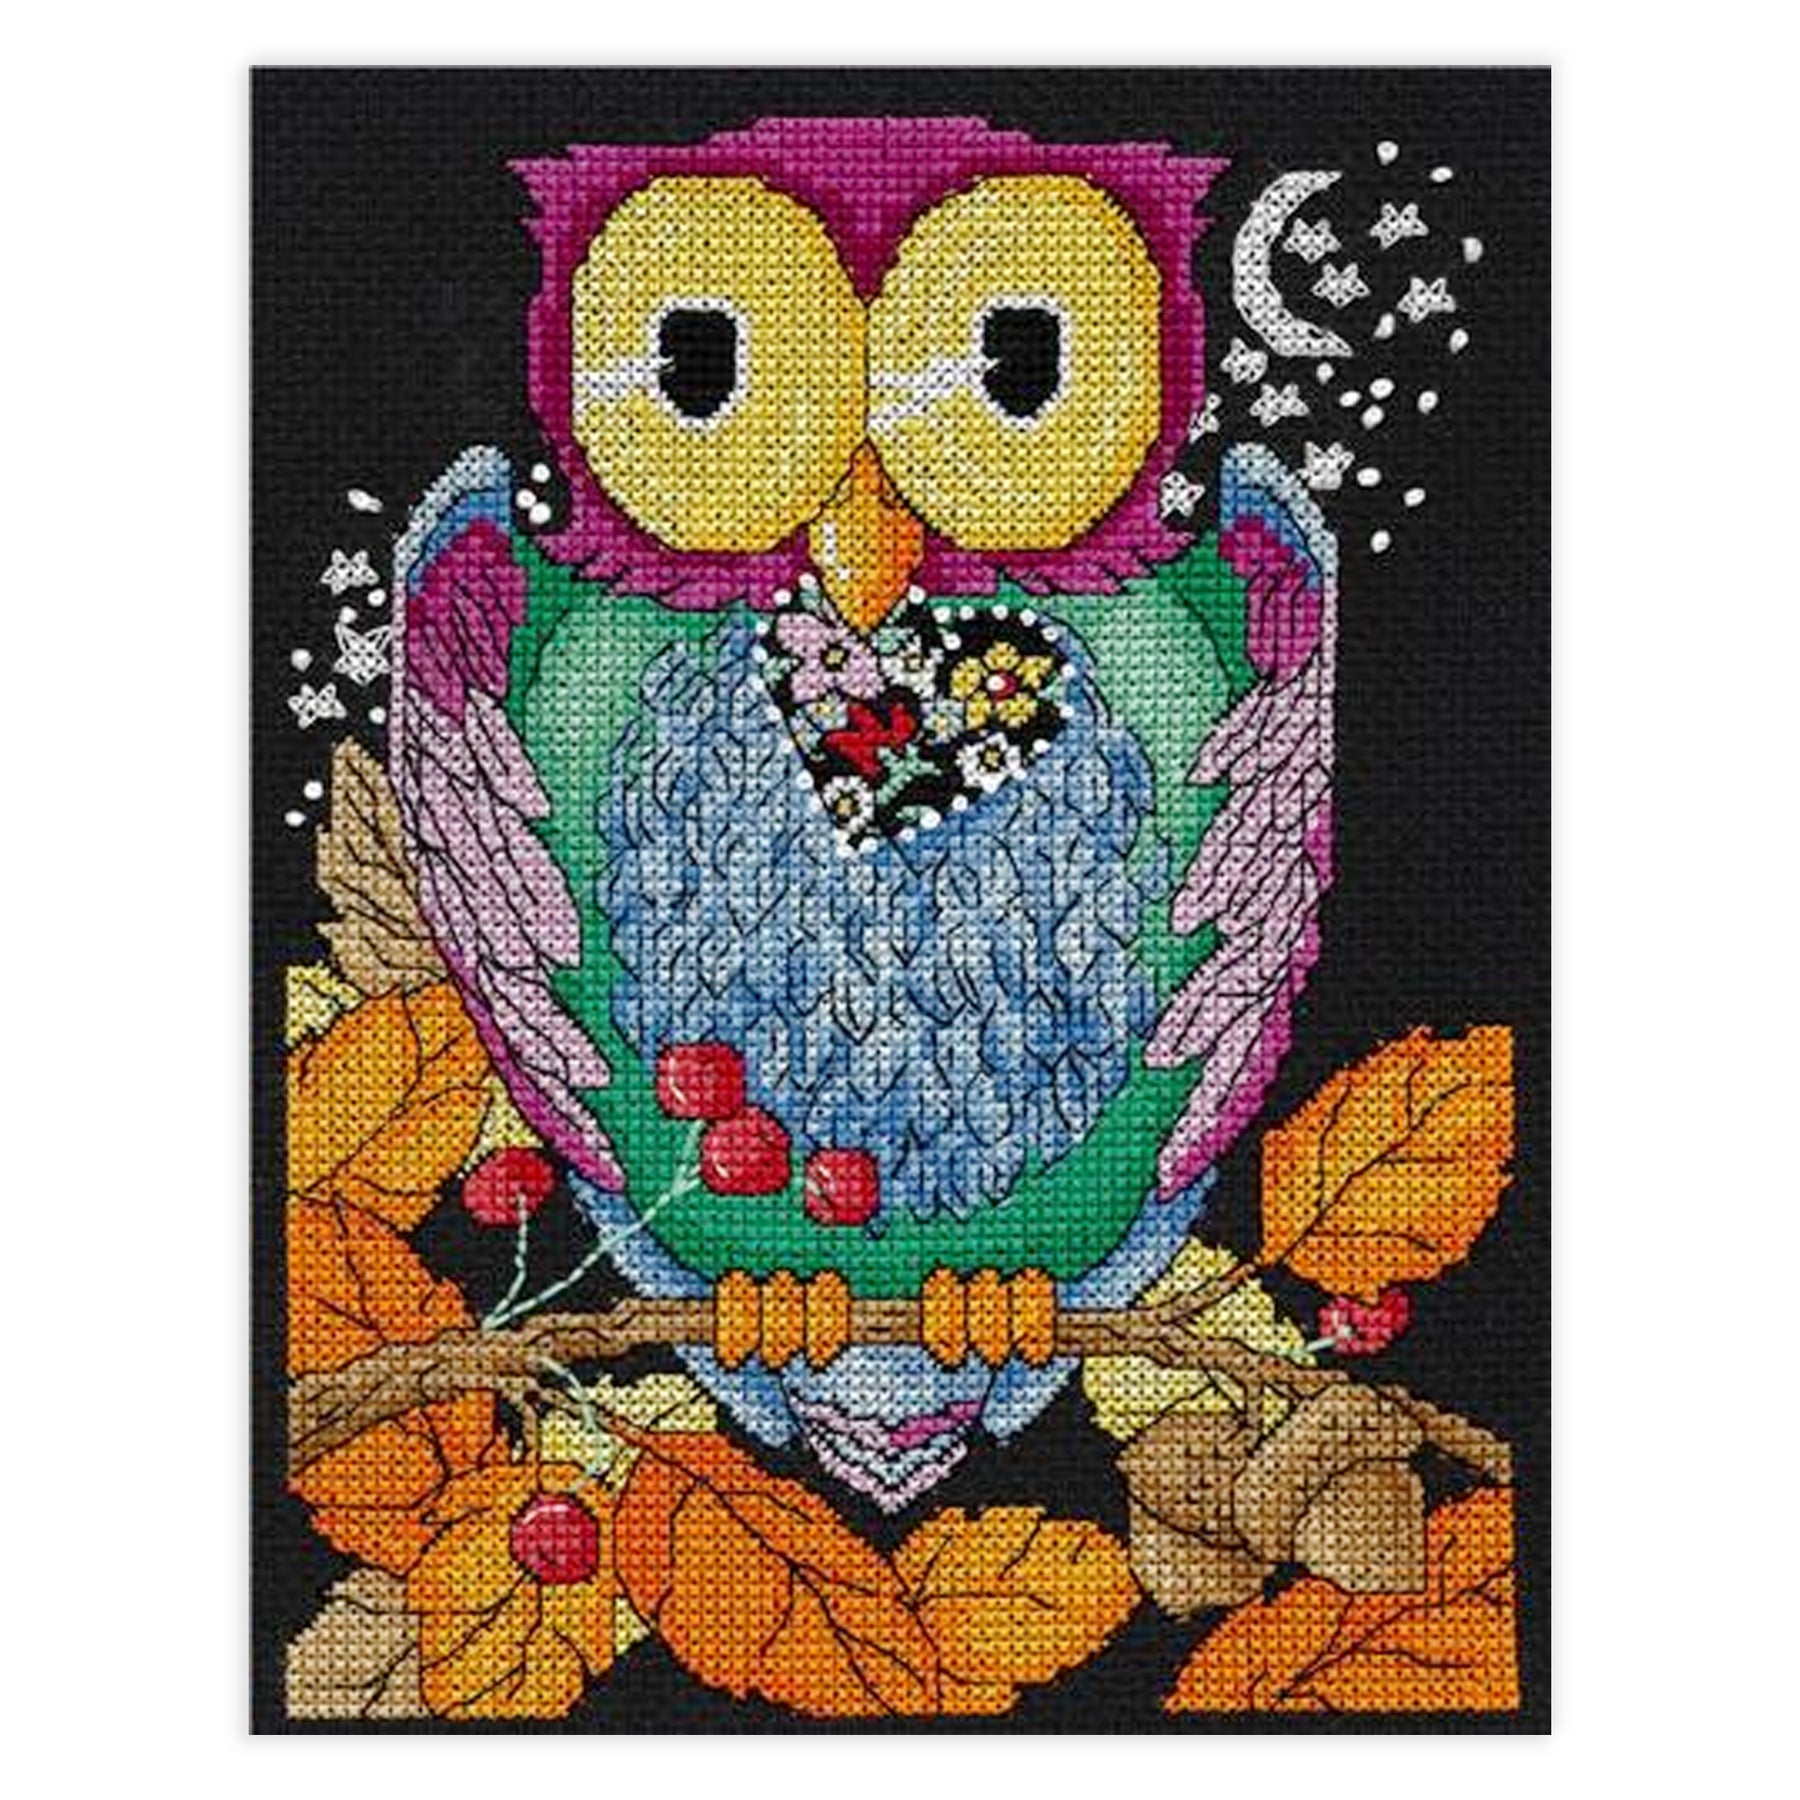 Hoo Loves You Counted Cross Stitch Kit